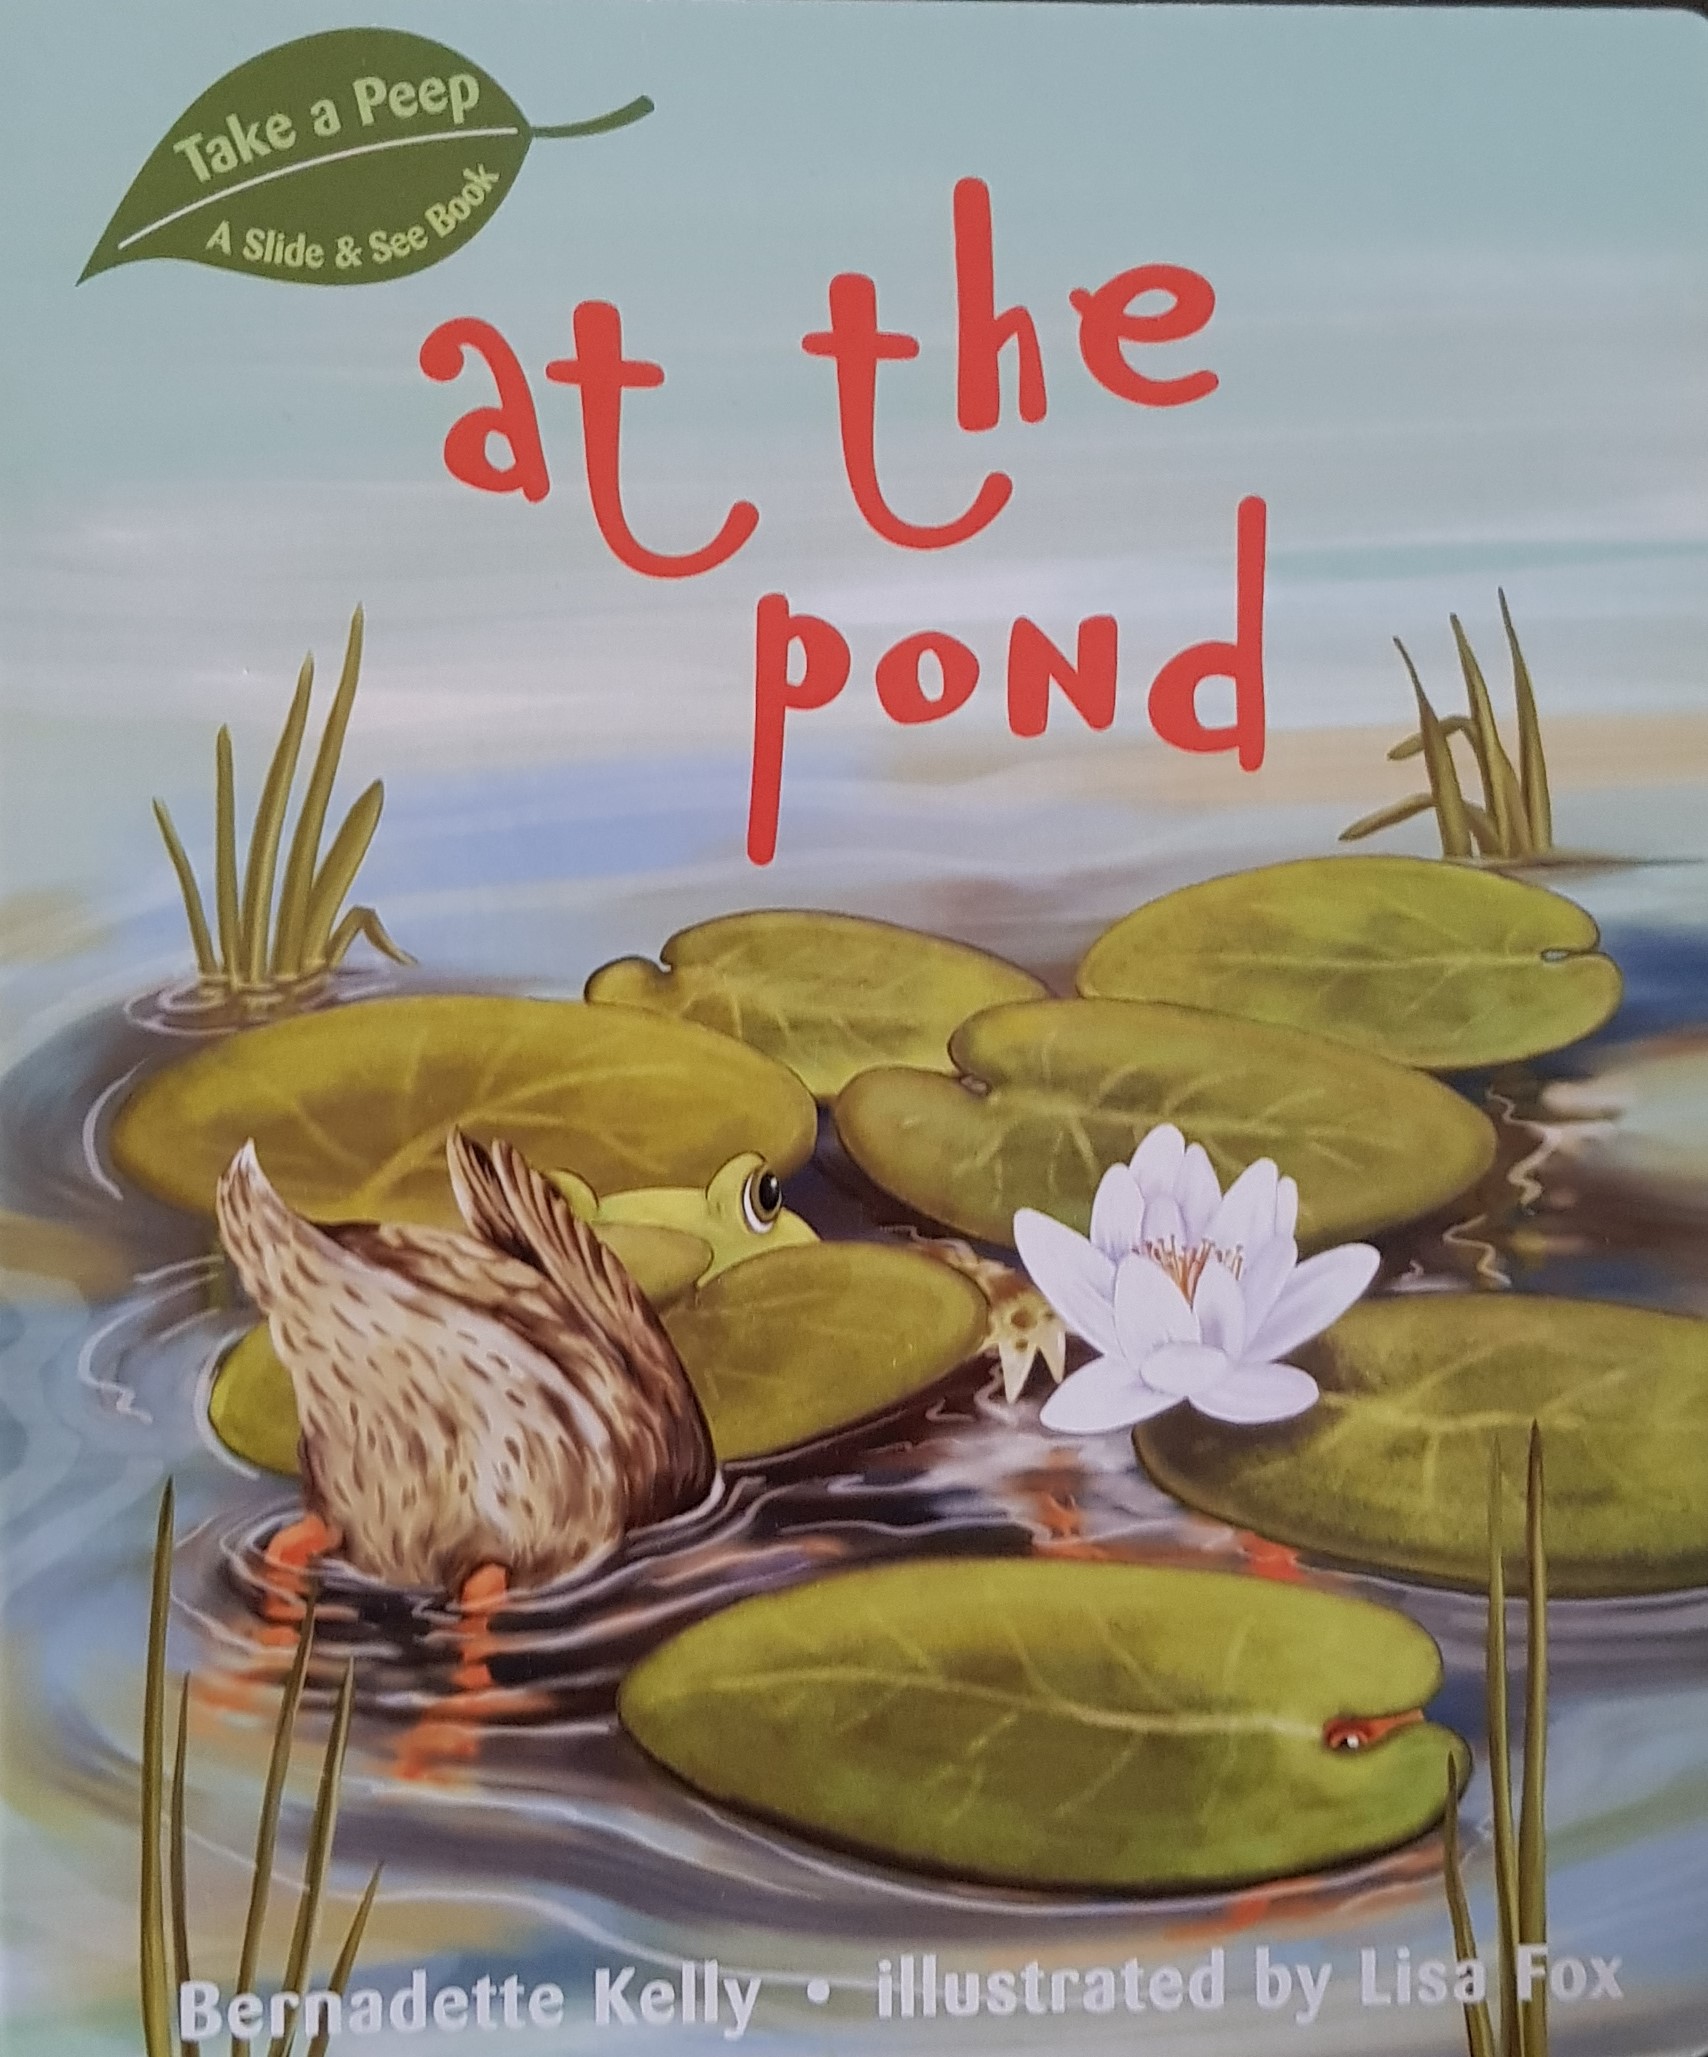 Book two from the 'Take a Peep' series for young children 2+ years. Slide open the pages to reveal creatures from the pond. Brimax Publishing.